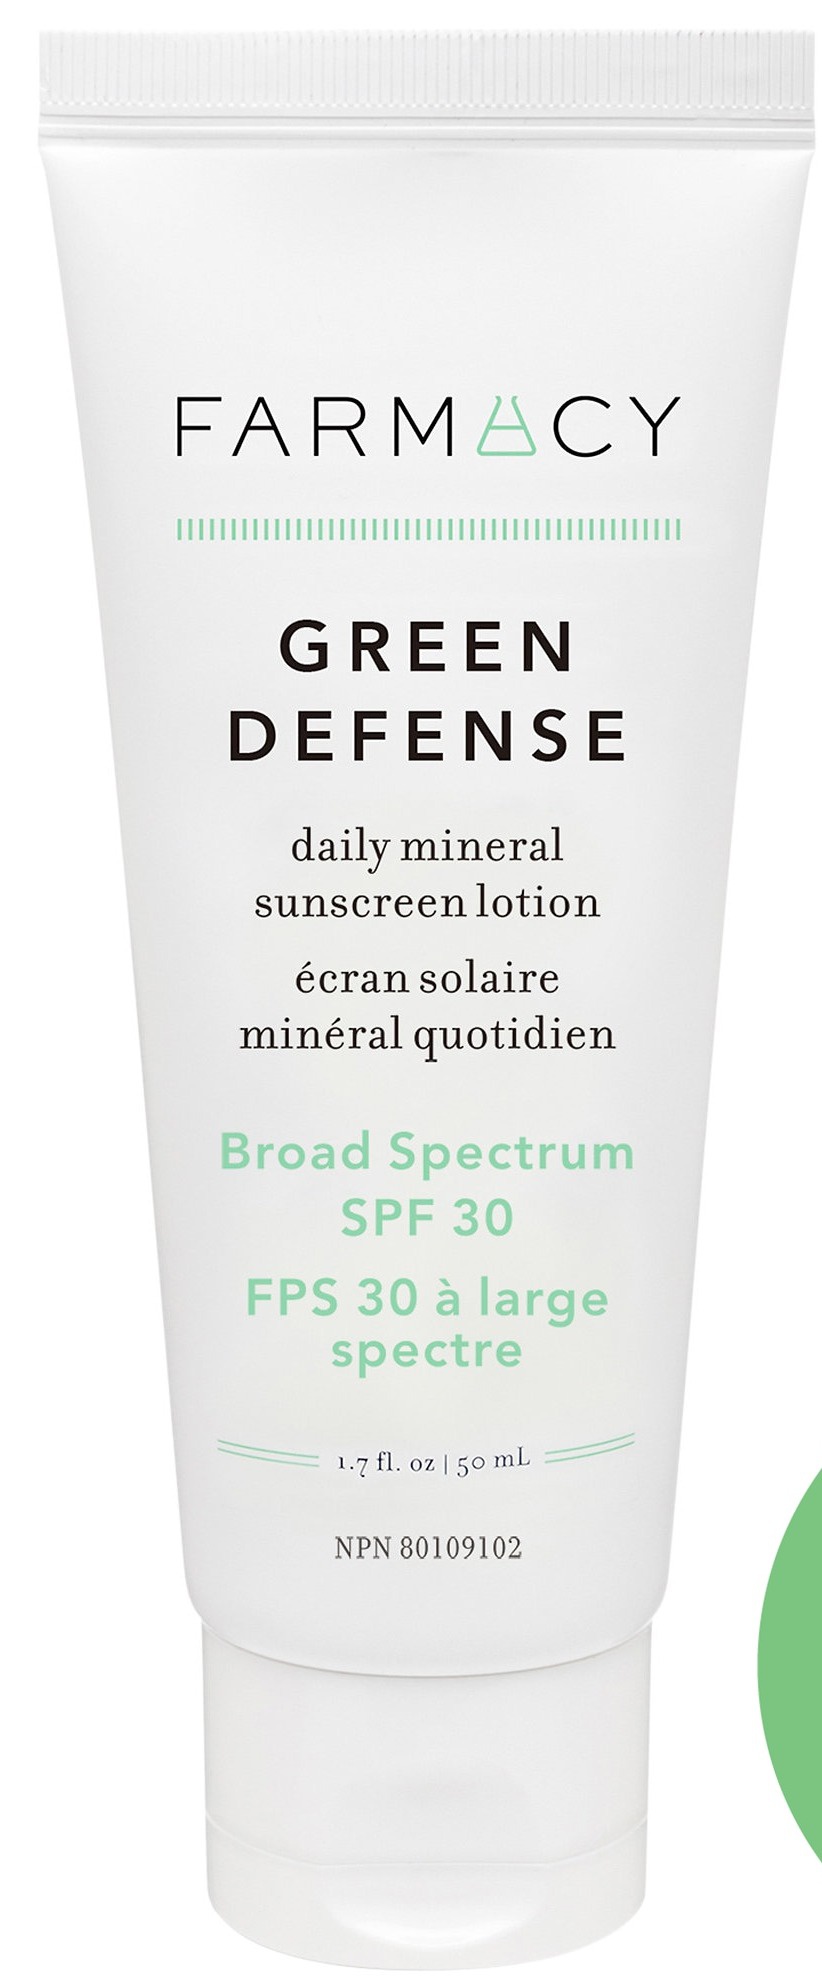 Farmacy Green Defense Daily Mineral Sunscreen Lotion Broad Spectrum SPF 30